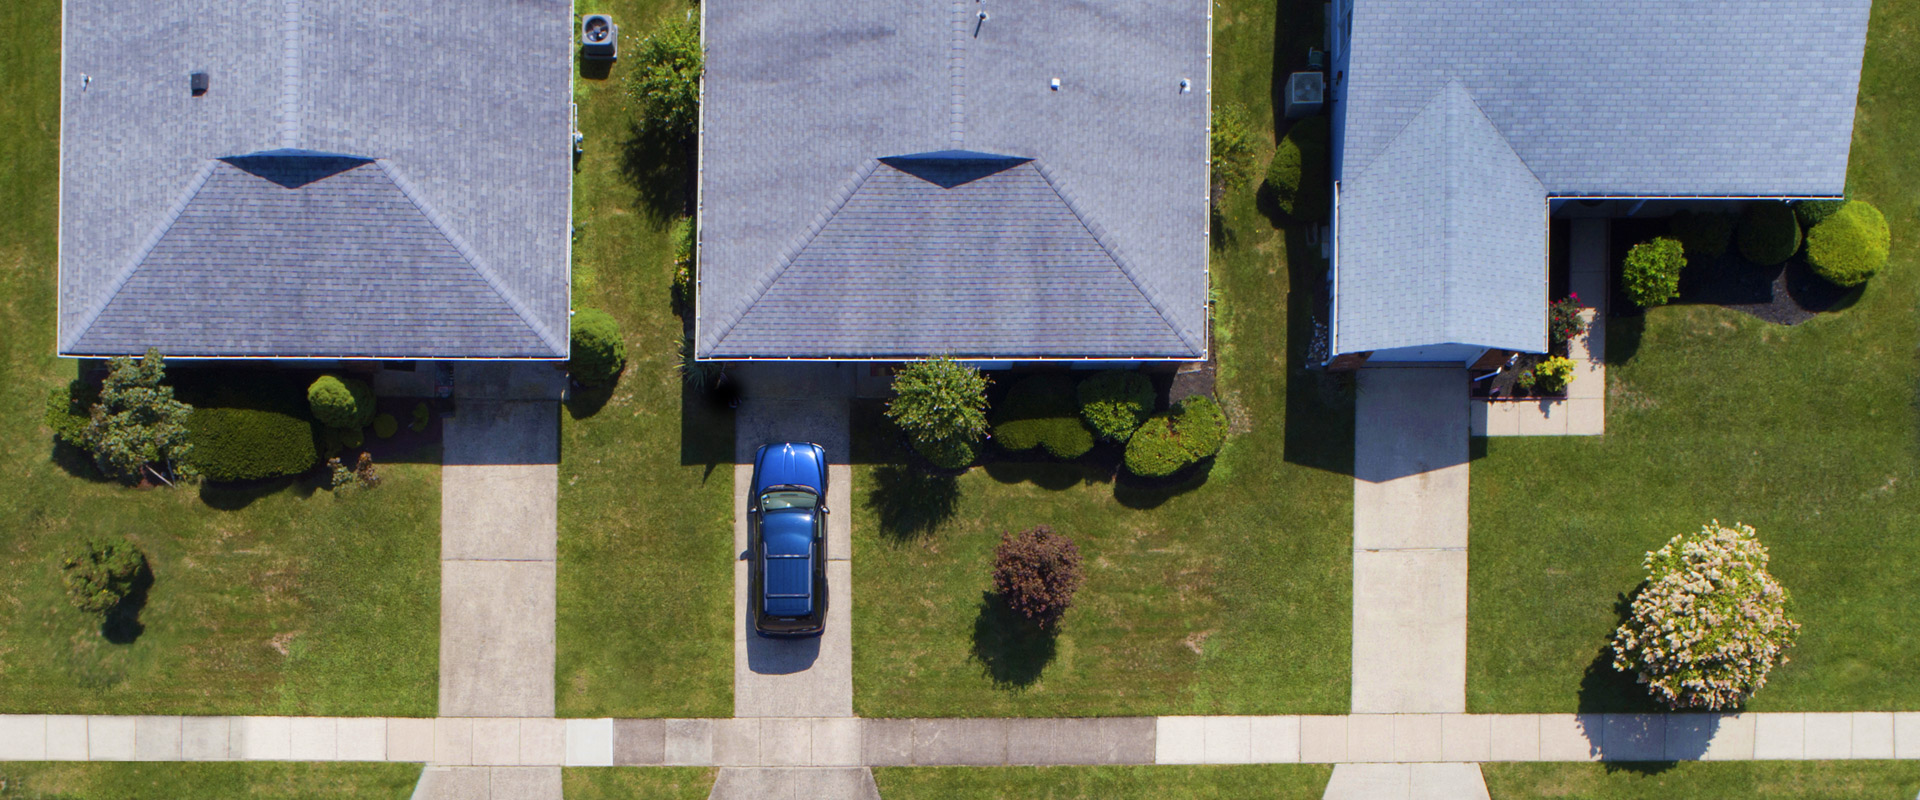 Aerial view of neighborhood of homes with drive ways lined up